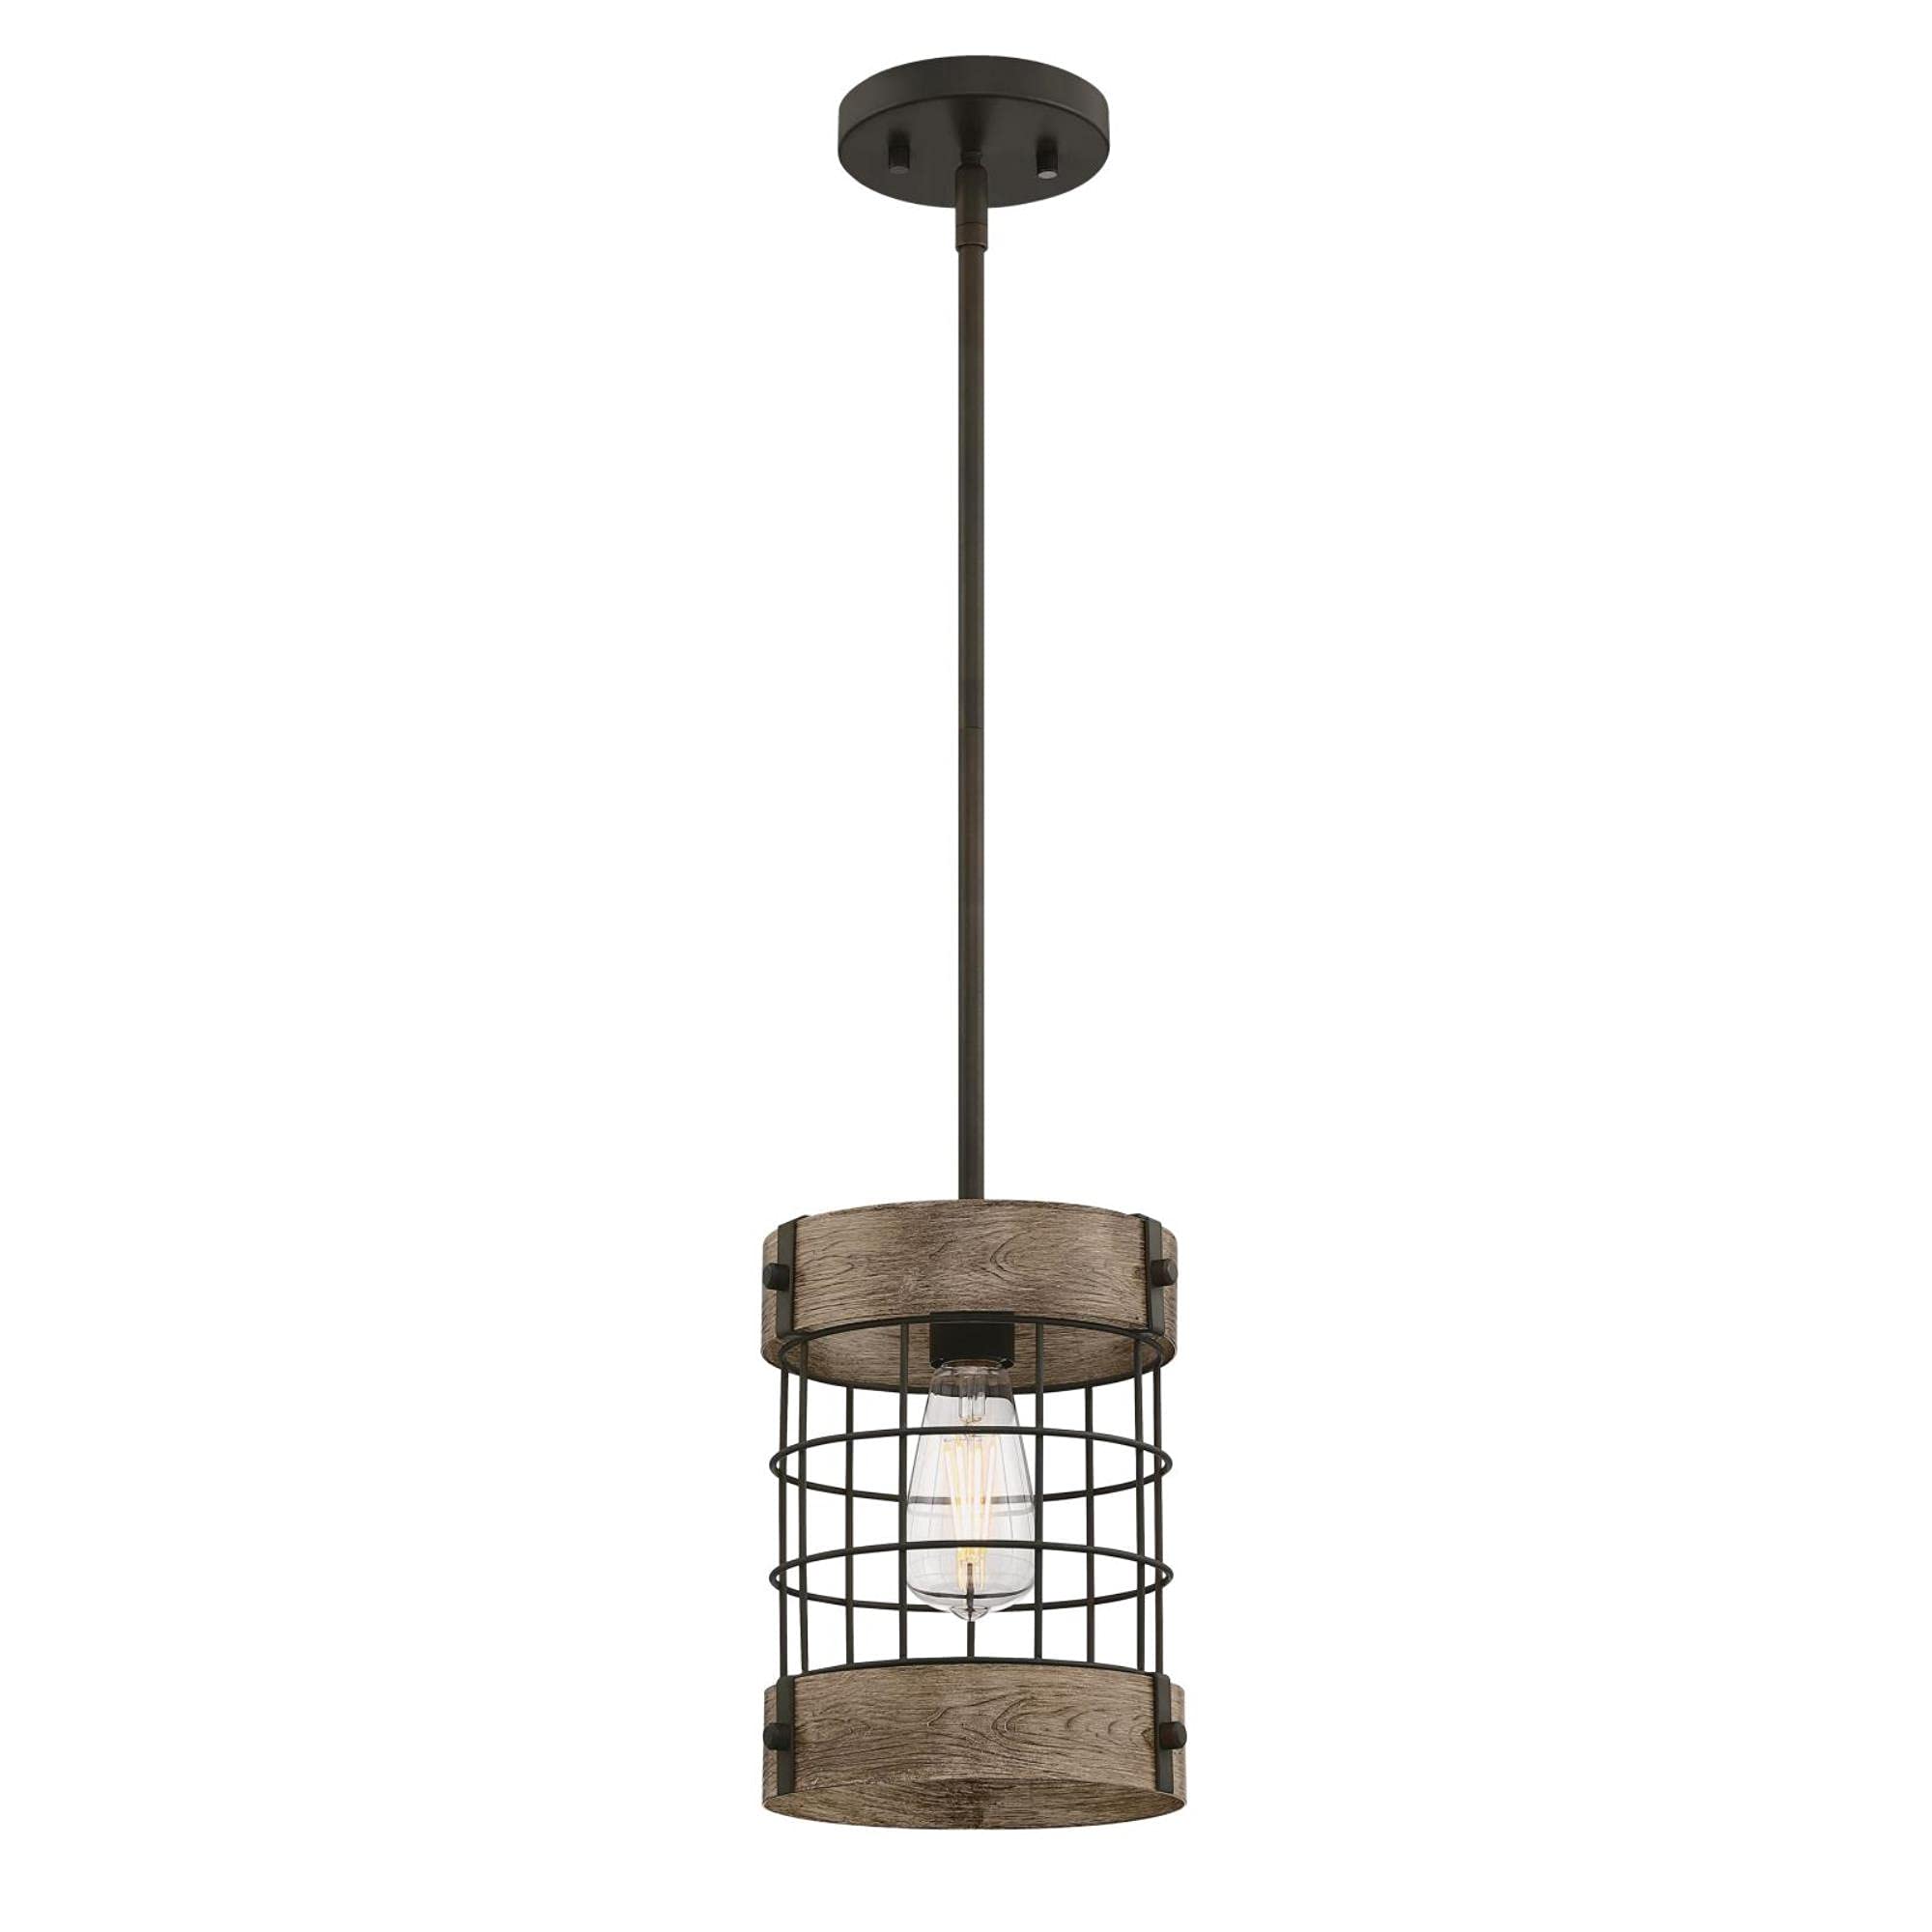 Westinghouse Lighting Langston One-Light Indoor Pendant, Oil-Rubbed Bronze Finish with Vintage Pine Accents, Cage Shade